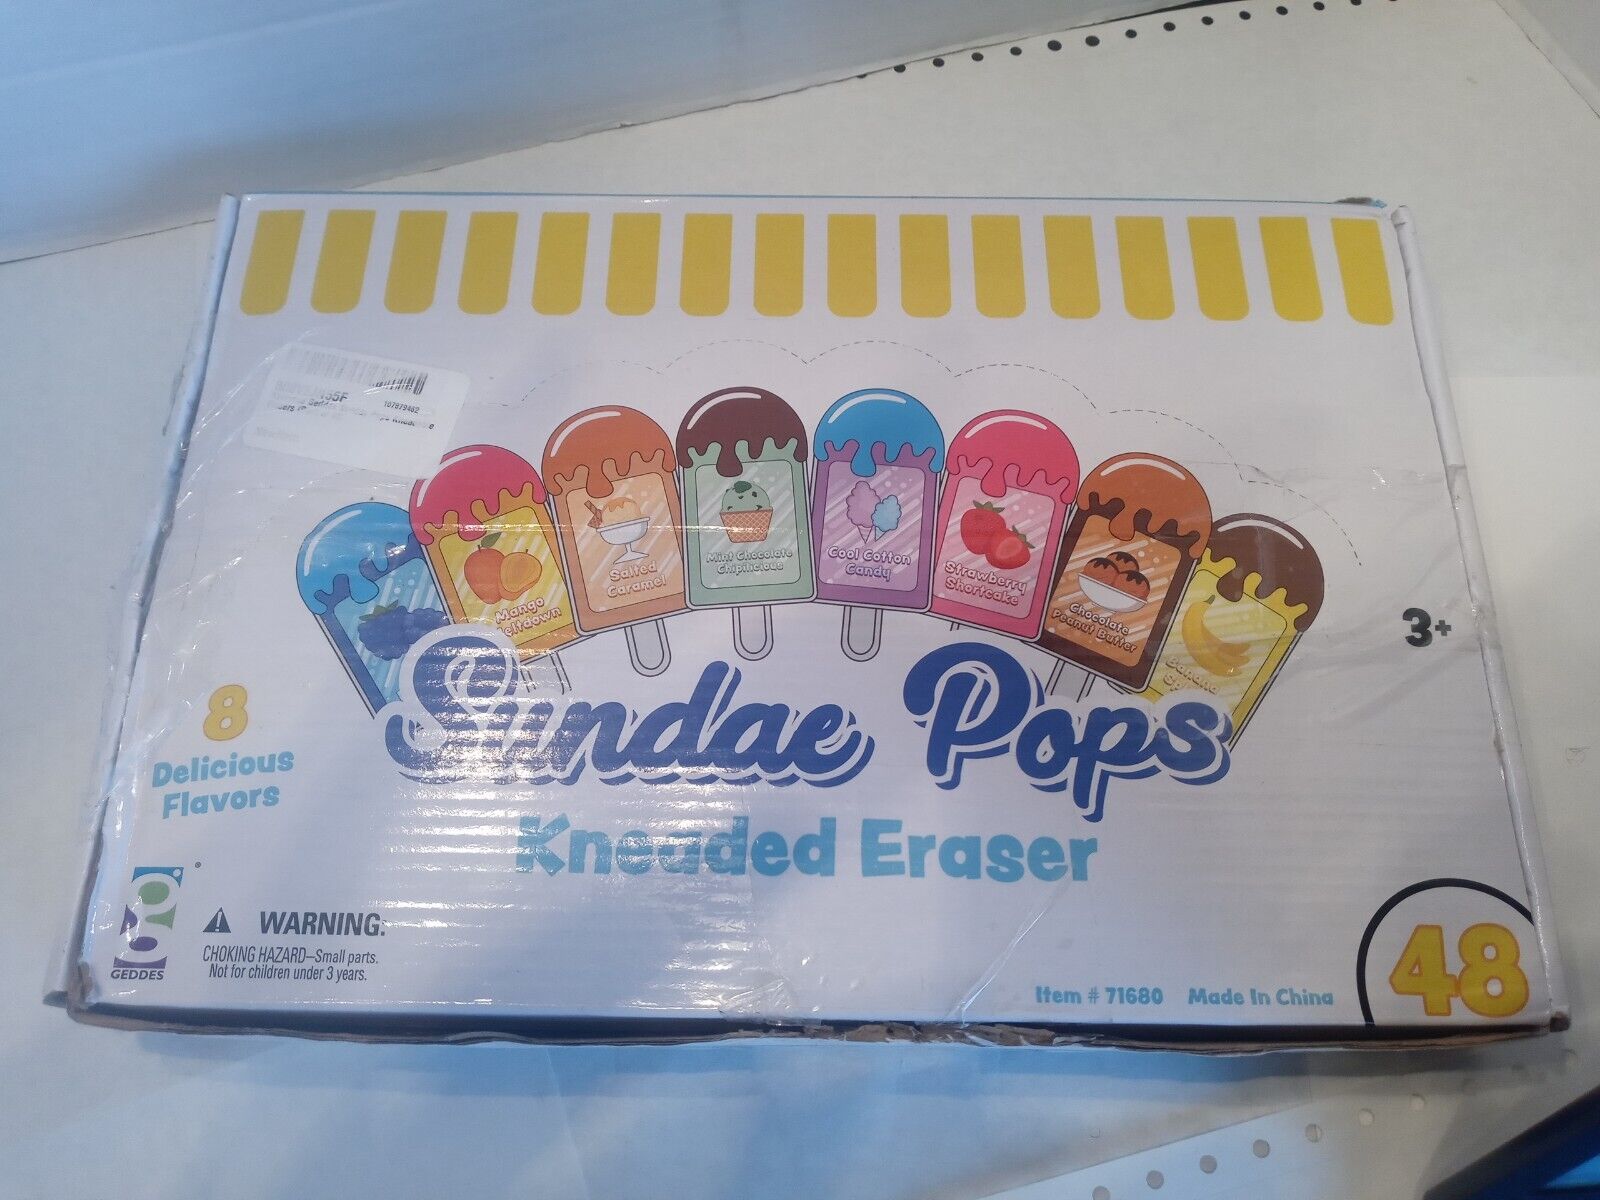 48 Pieces Sundae Pops Kneaded Erasers, 8 Delicious Scents Flavors  